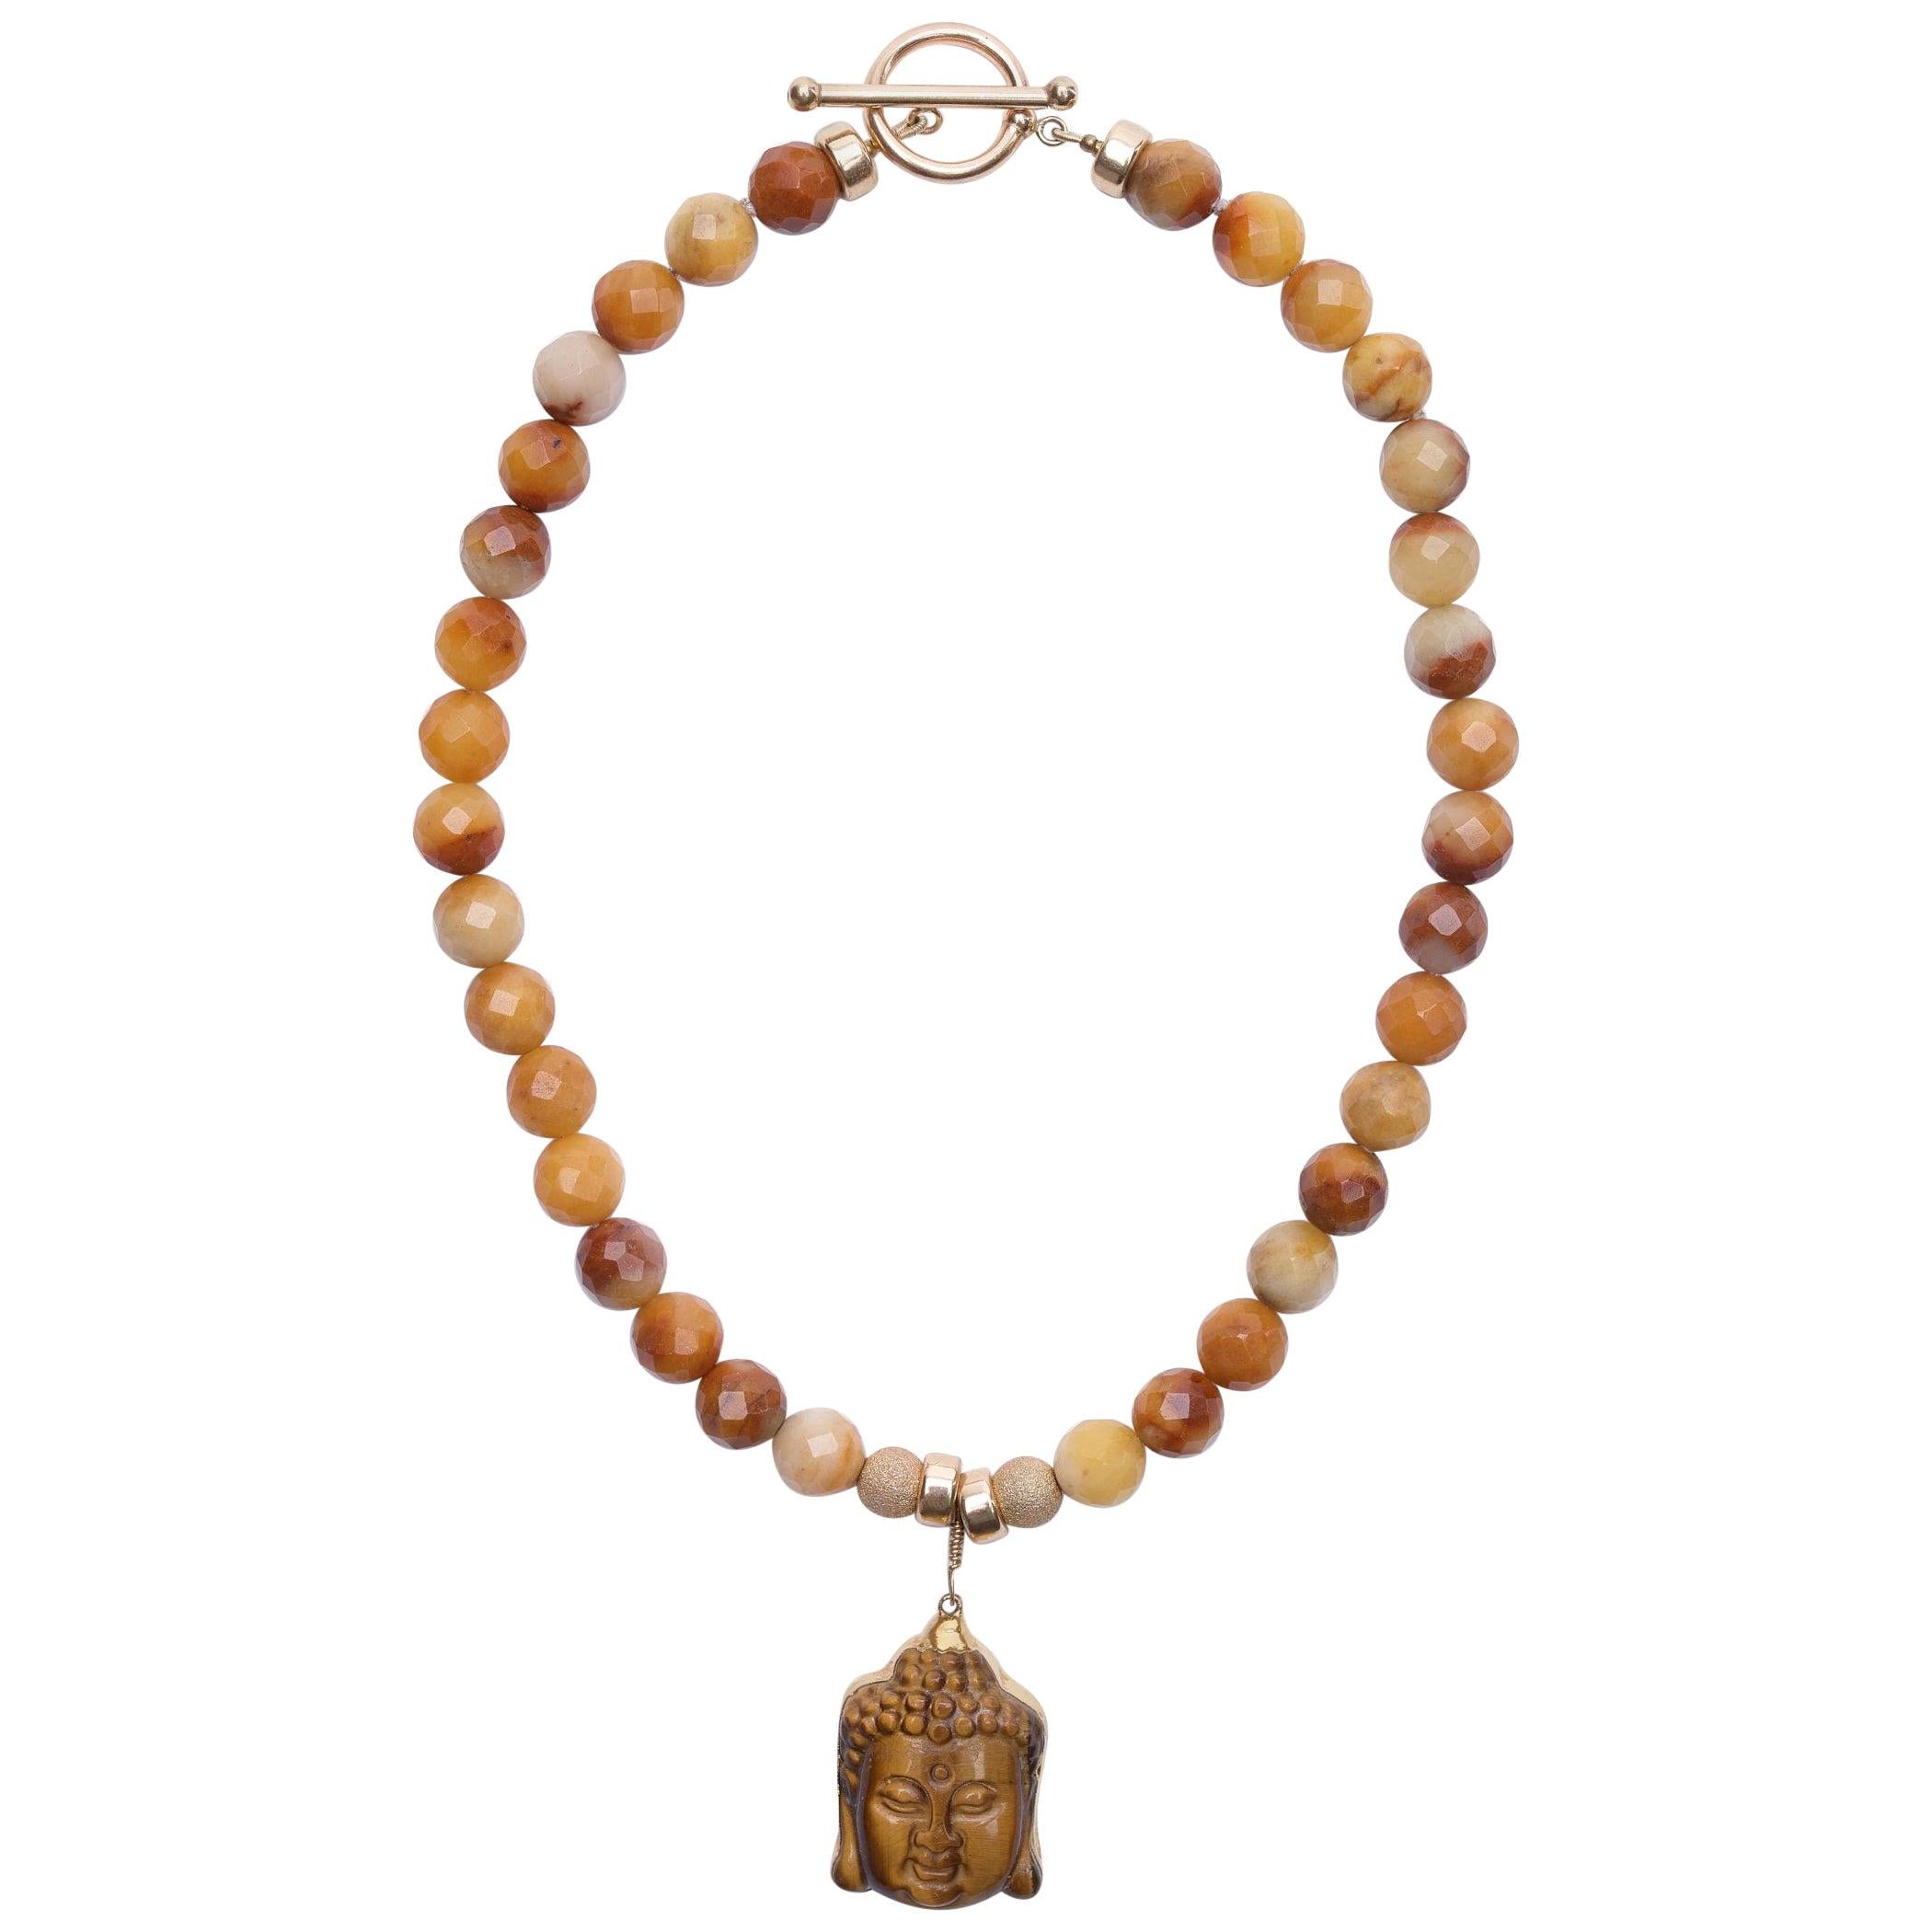 Golden Jade Buddha Necklaces For Sale